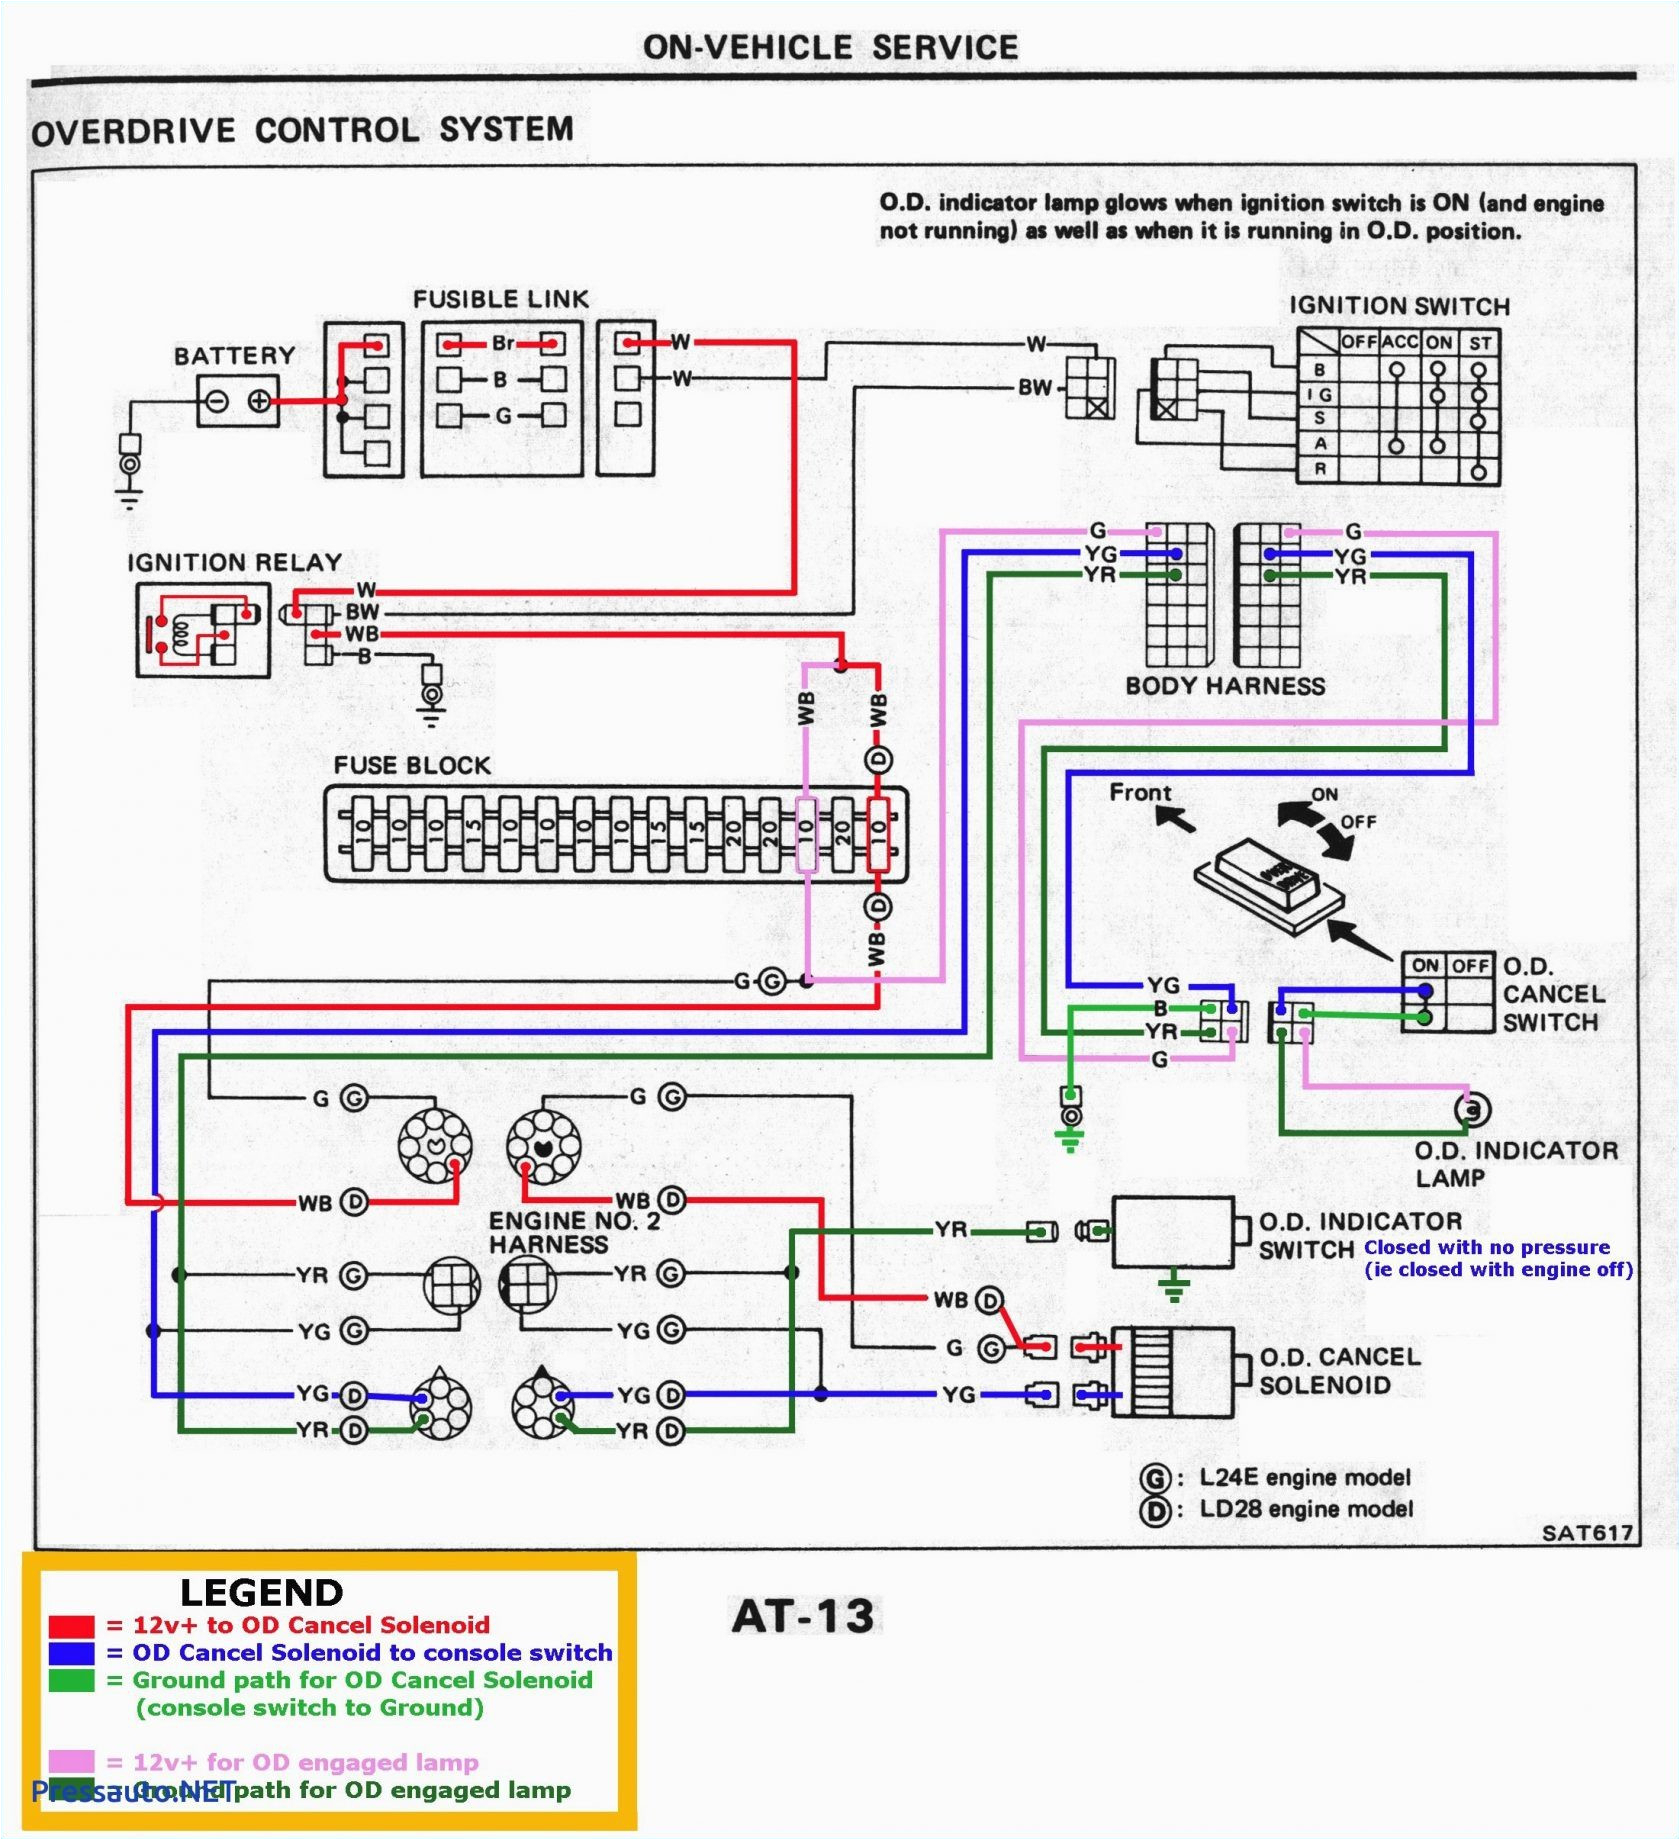 36 rittal thermostat wiring diagram